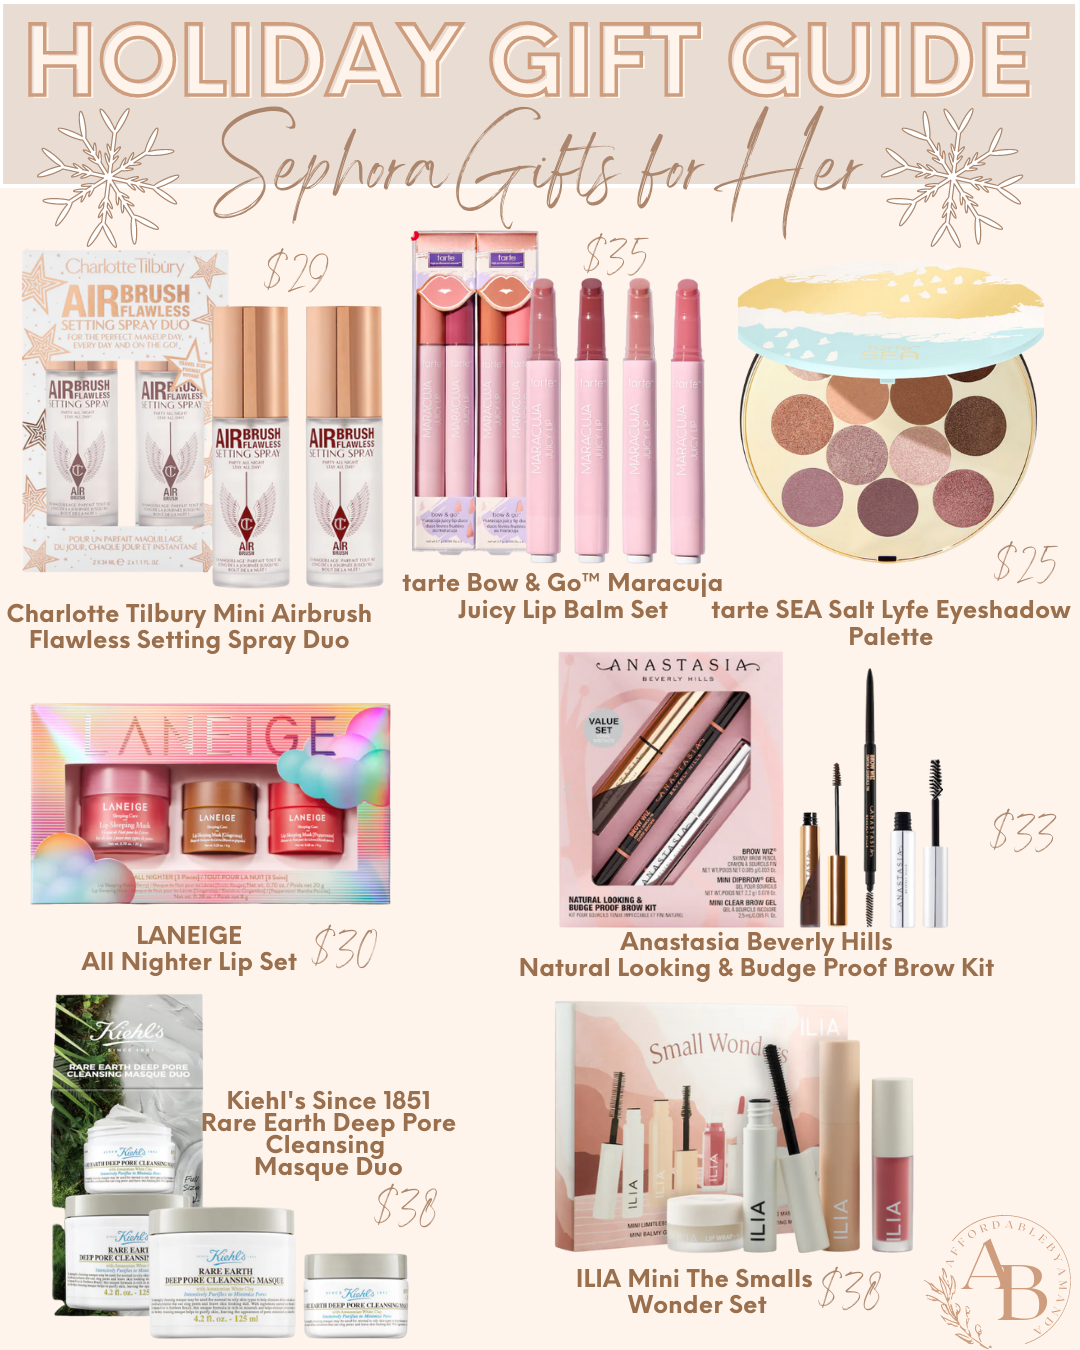 30+ Best Sephora Gifts for Her in 2021 - Affordable by Amanda